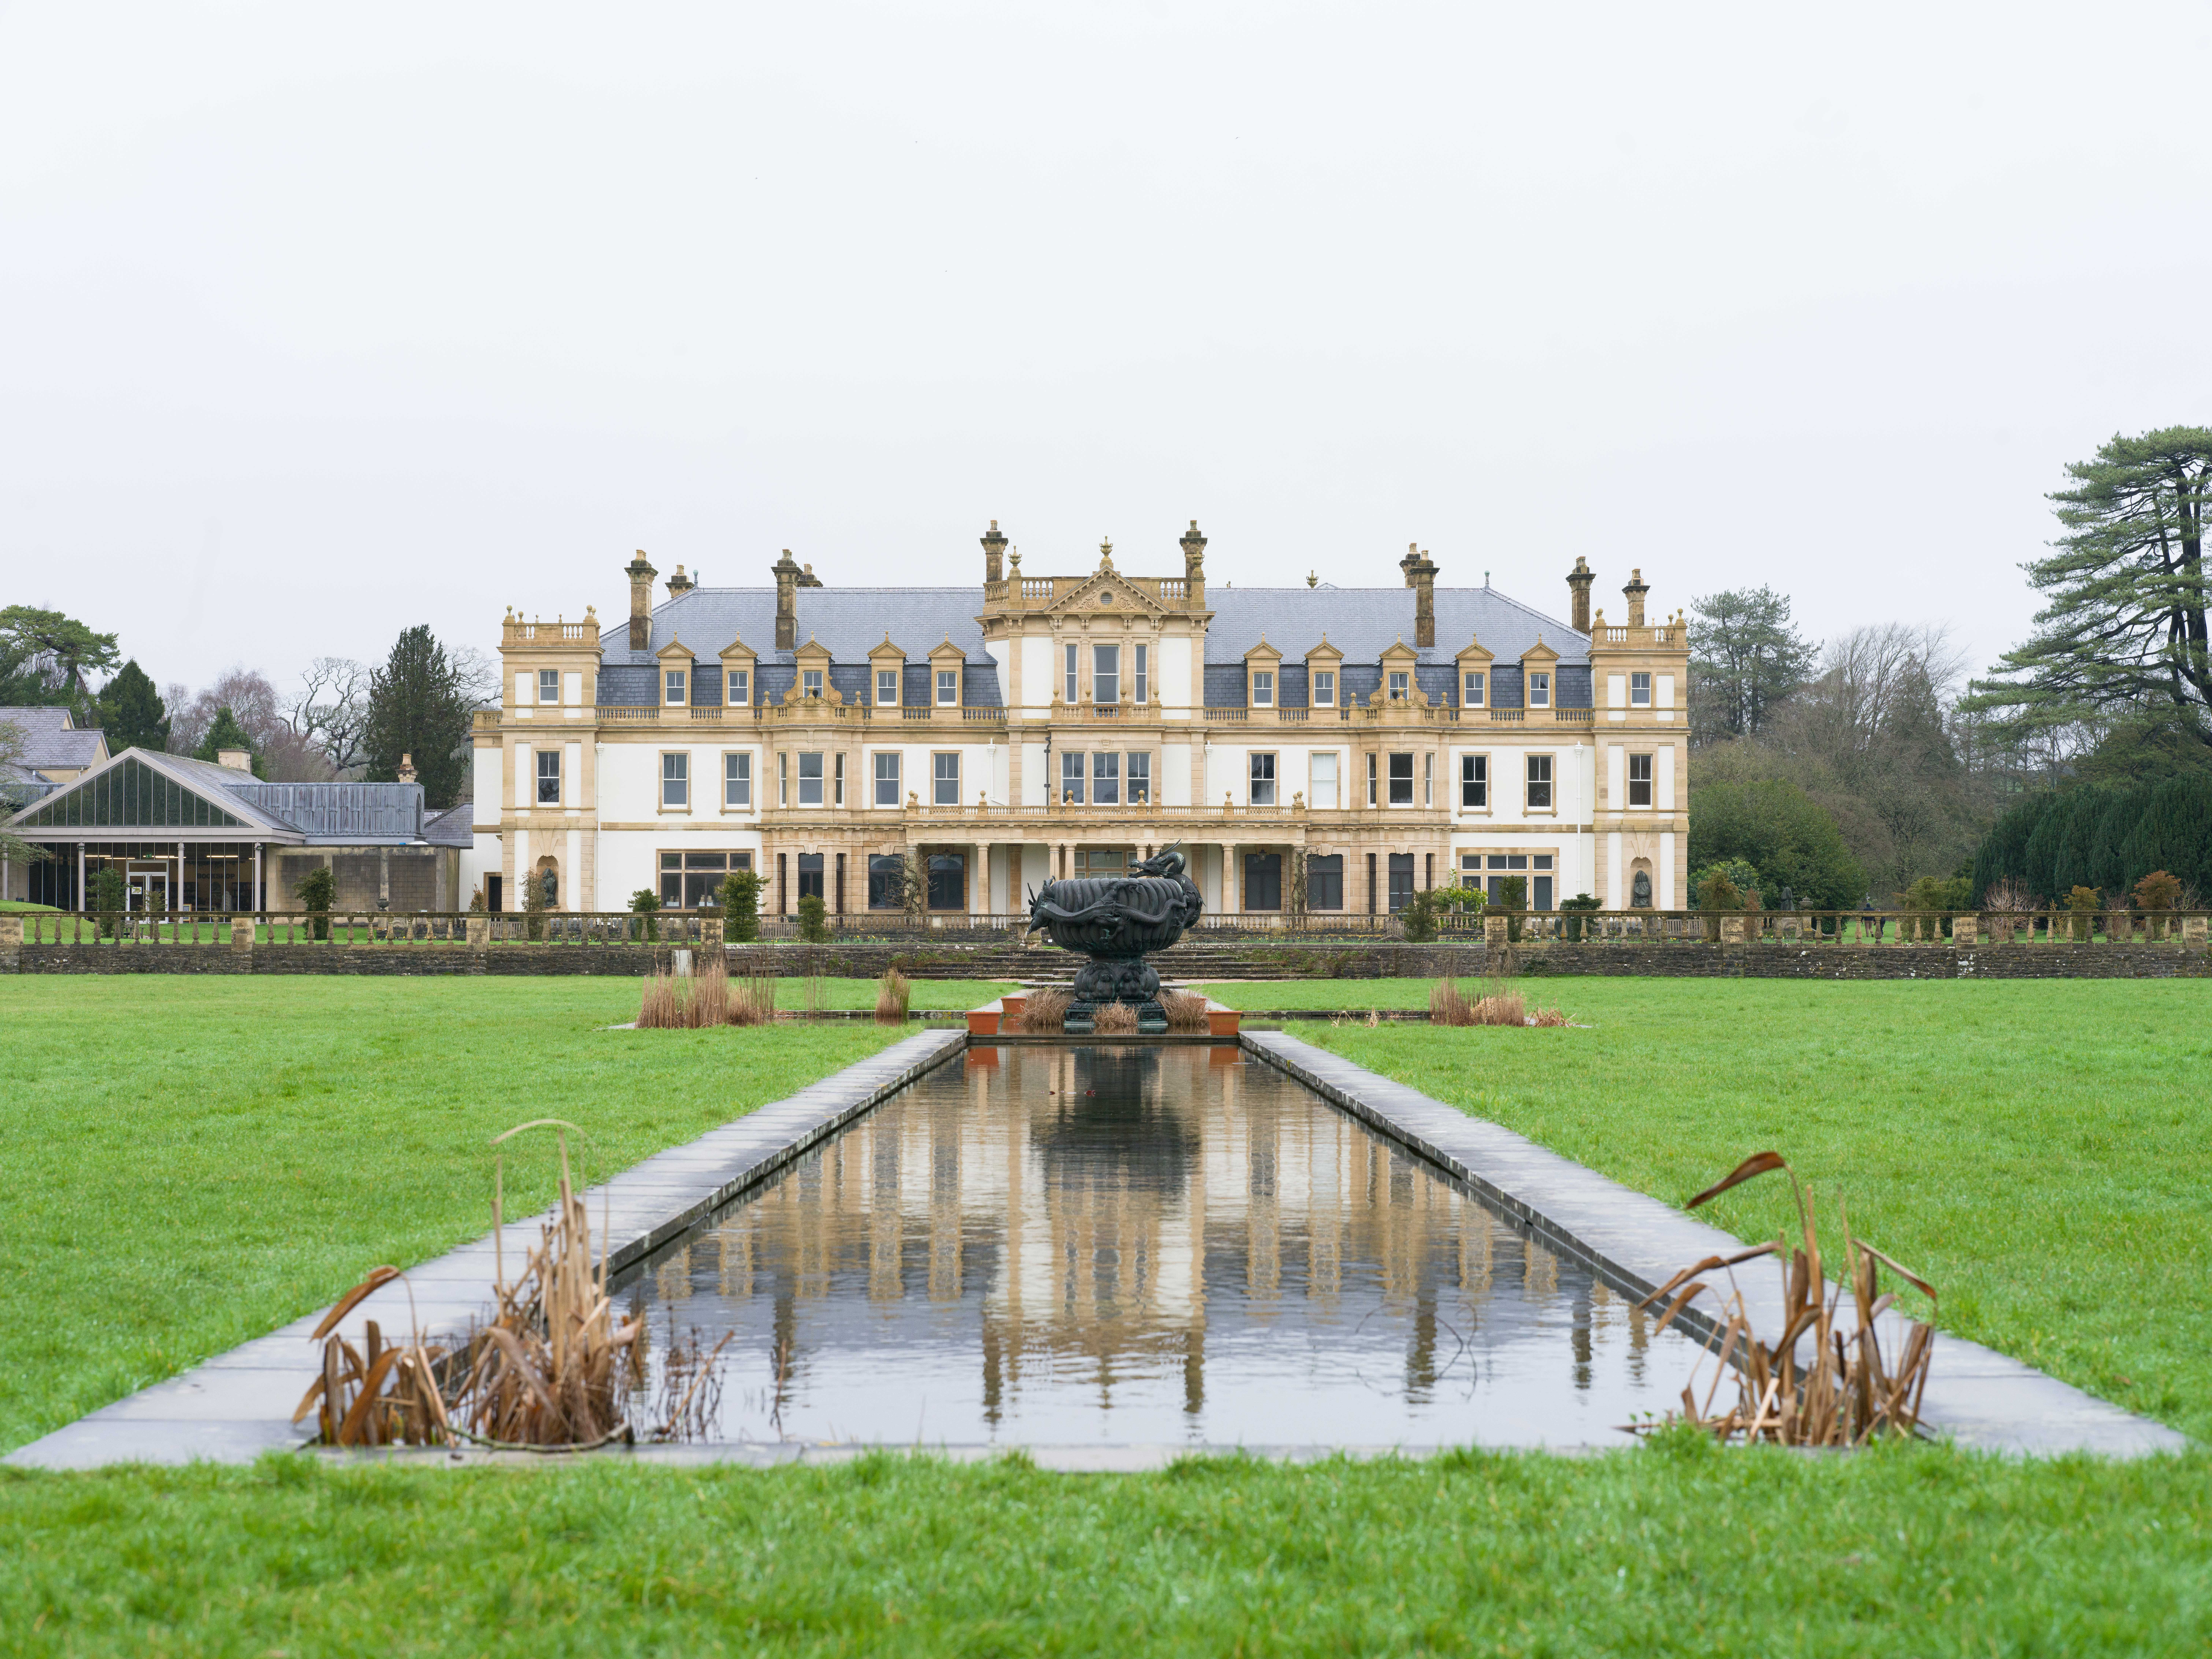 A photo of a British stately home taken on an overcast day.